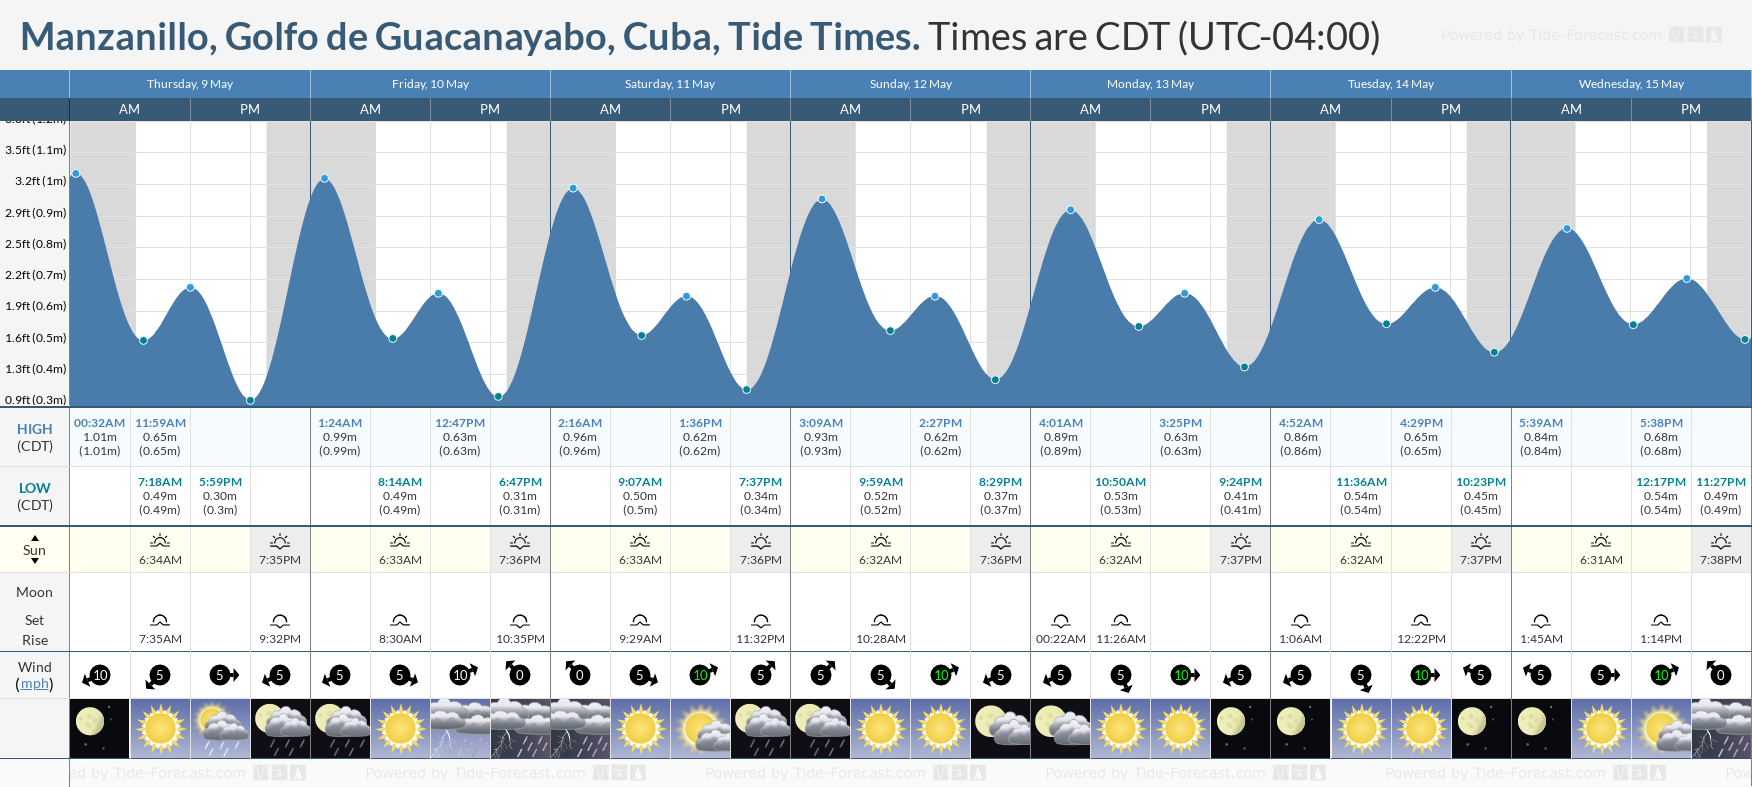 Manzanillo, Golfo de Guacanayabo, Cuba Tide Chart including high and low tide tide times for the next 7 days